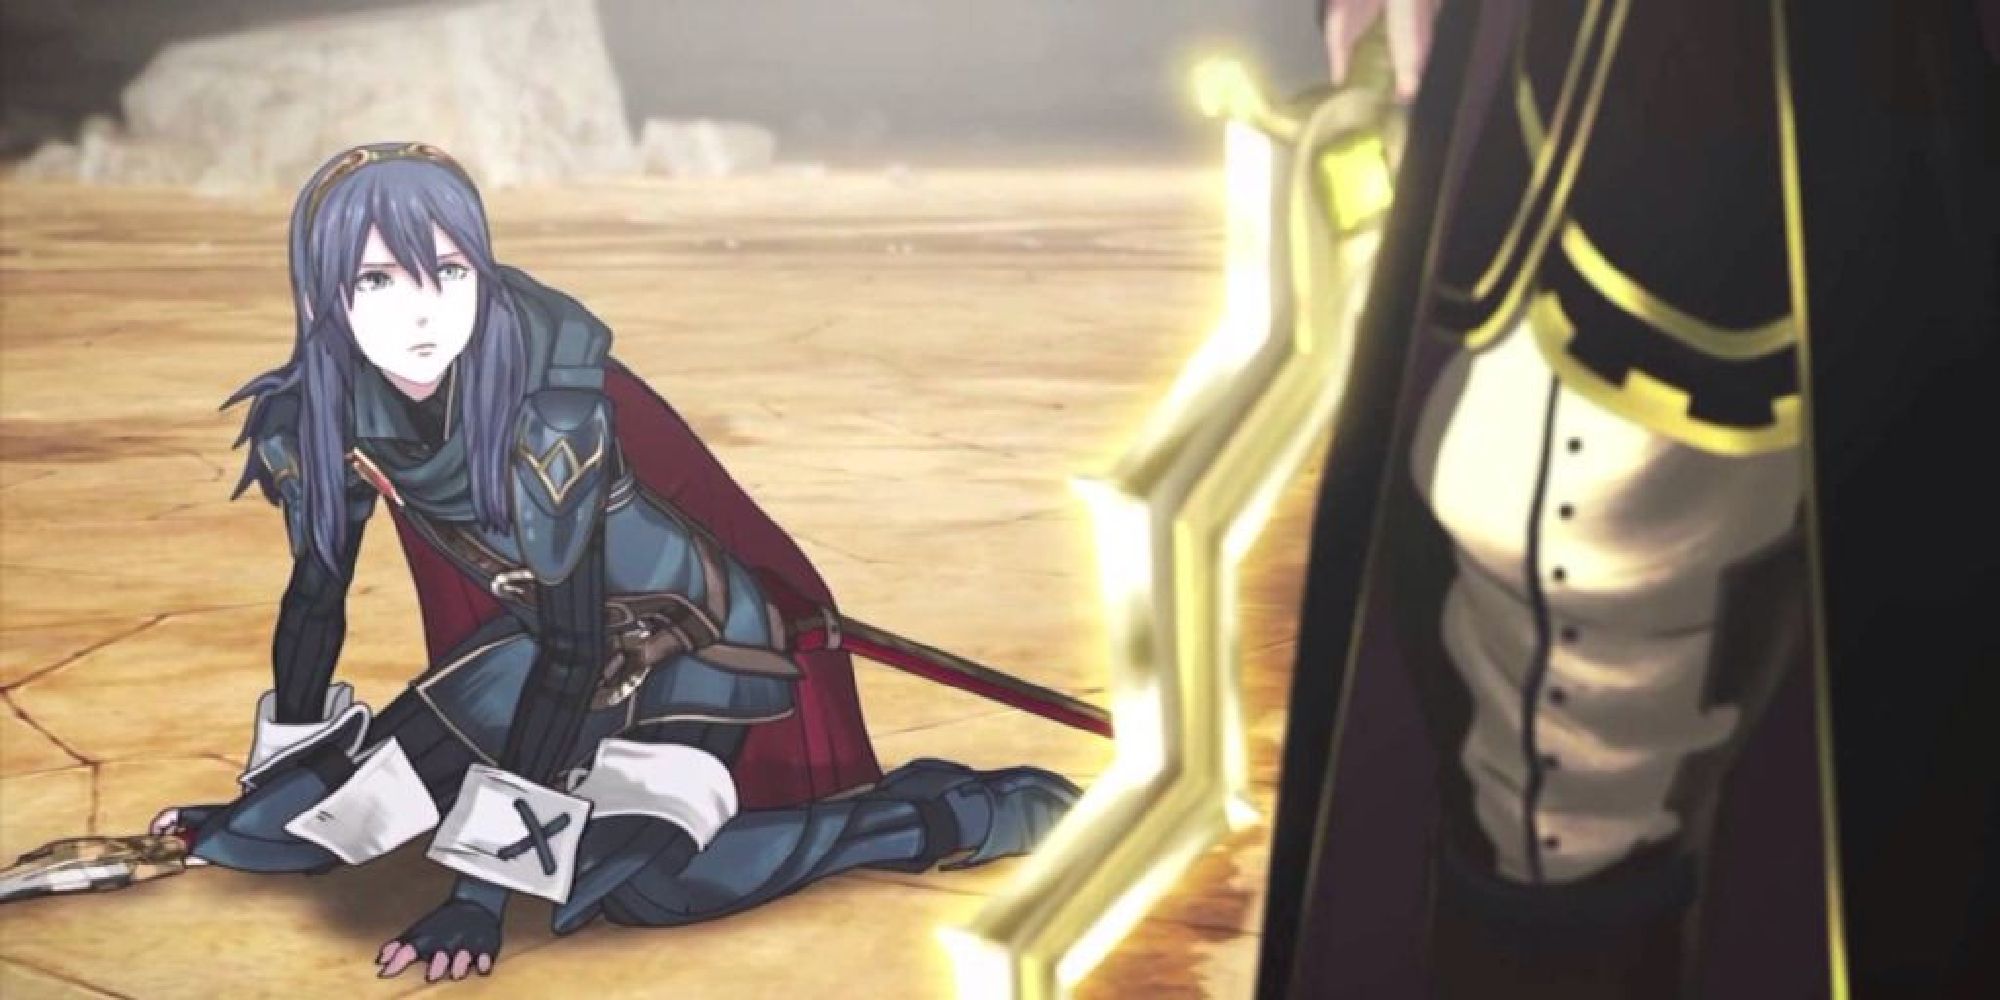 Lucina on the ground staring up at Robin and the Levin sword in their reveal trailer